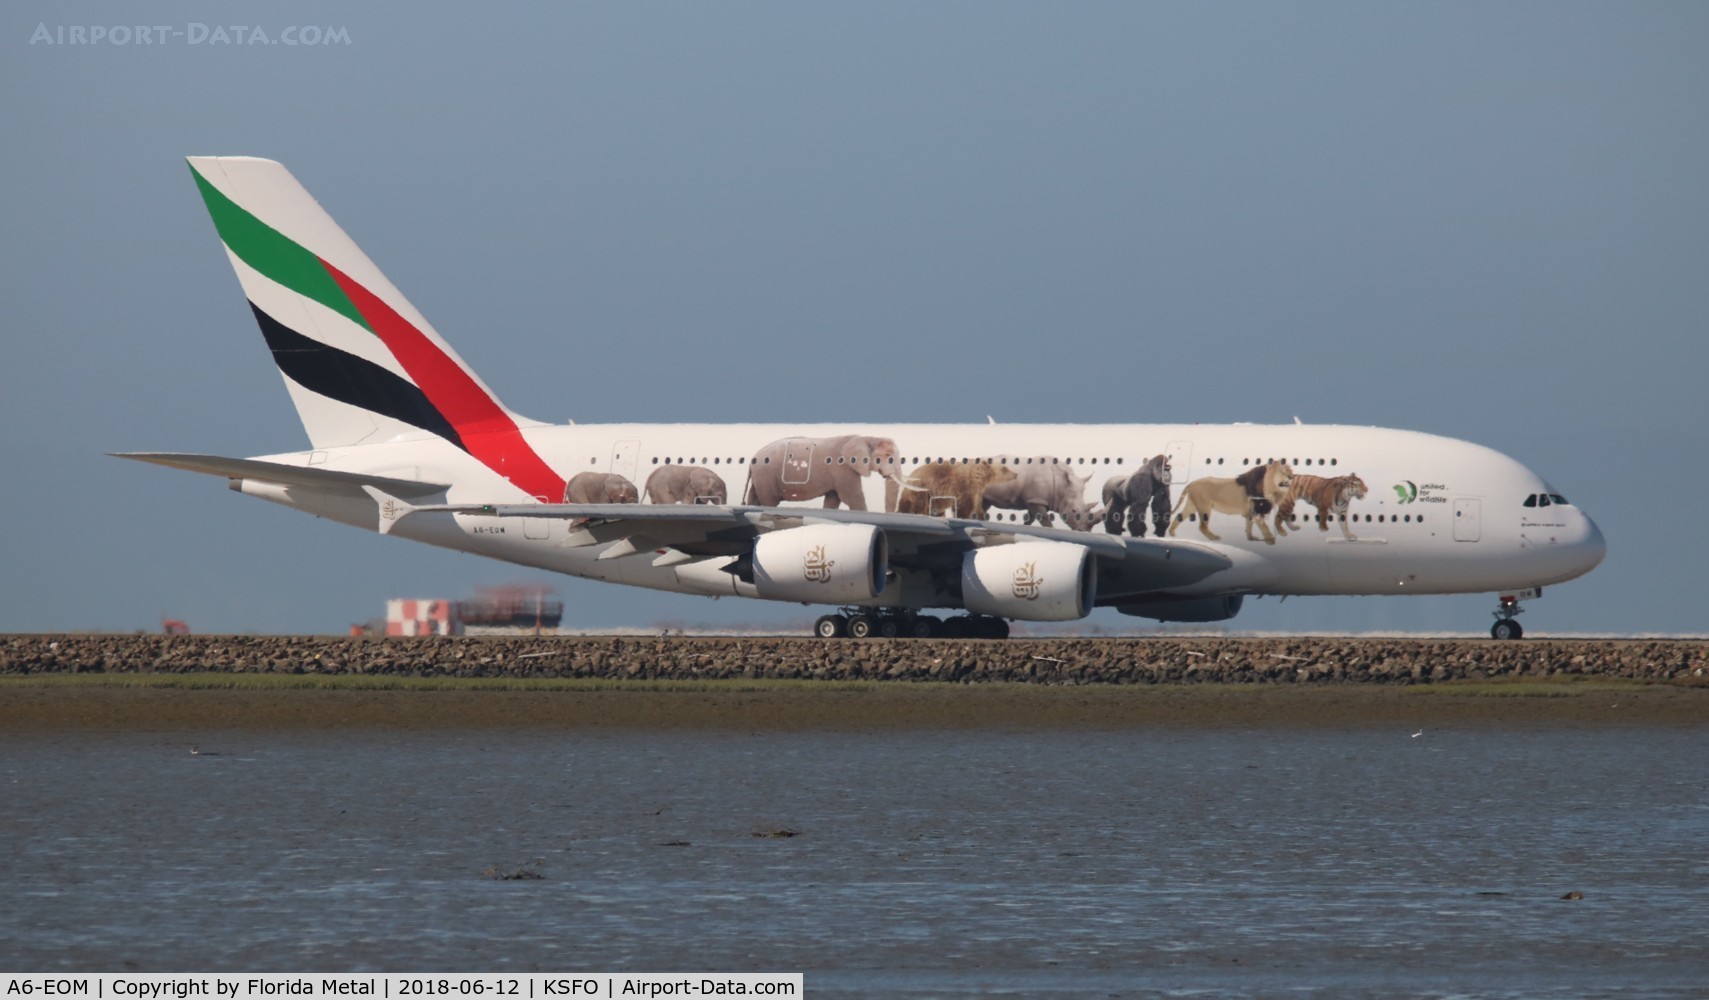 A6-EOM, 2015 Airbus A380-861 C/N 187, Emirates A380 zx